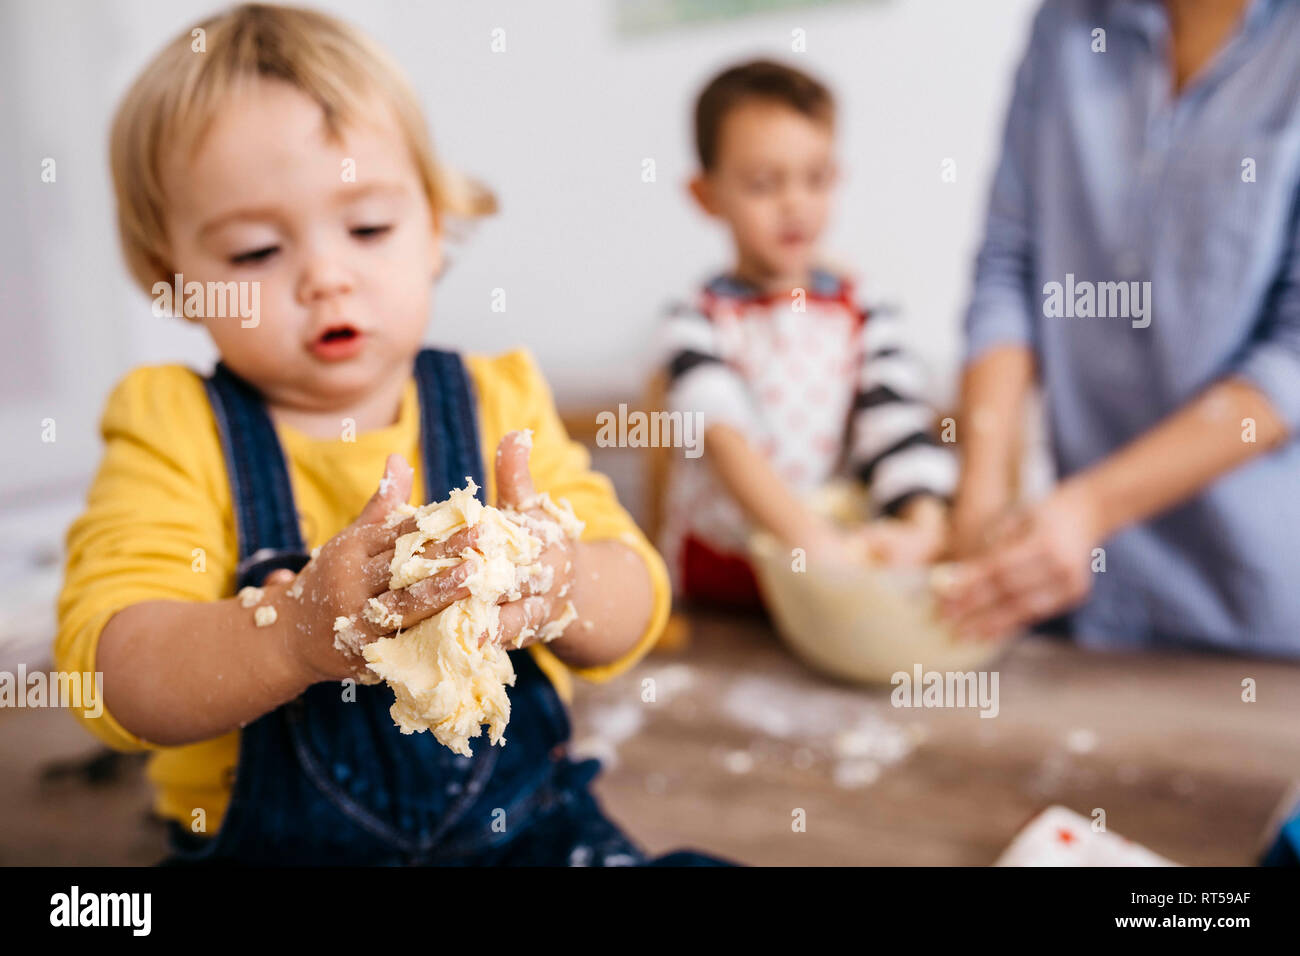 Toddler girl kneading dough with hers hands, close-up Stock Photo